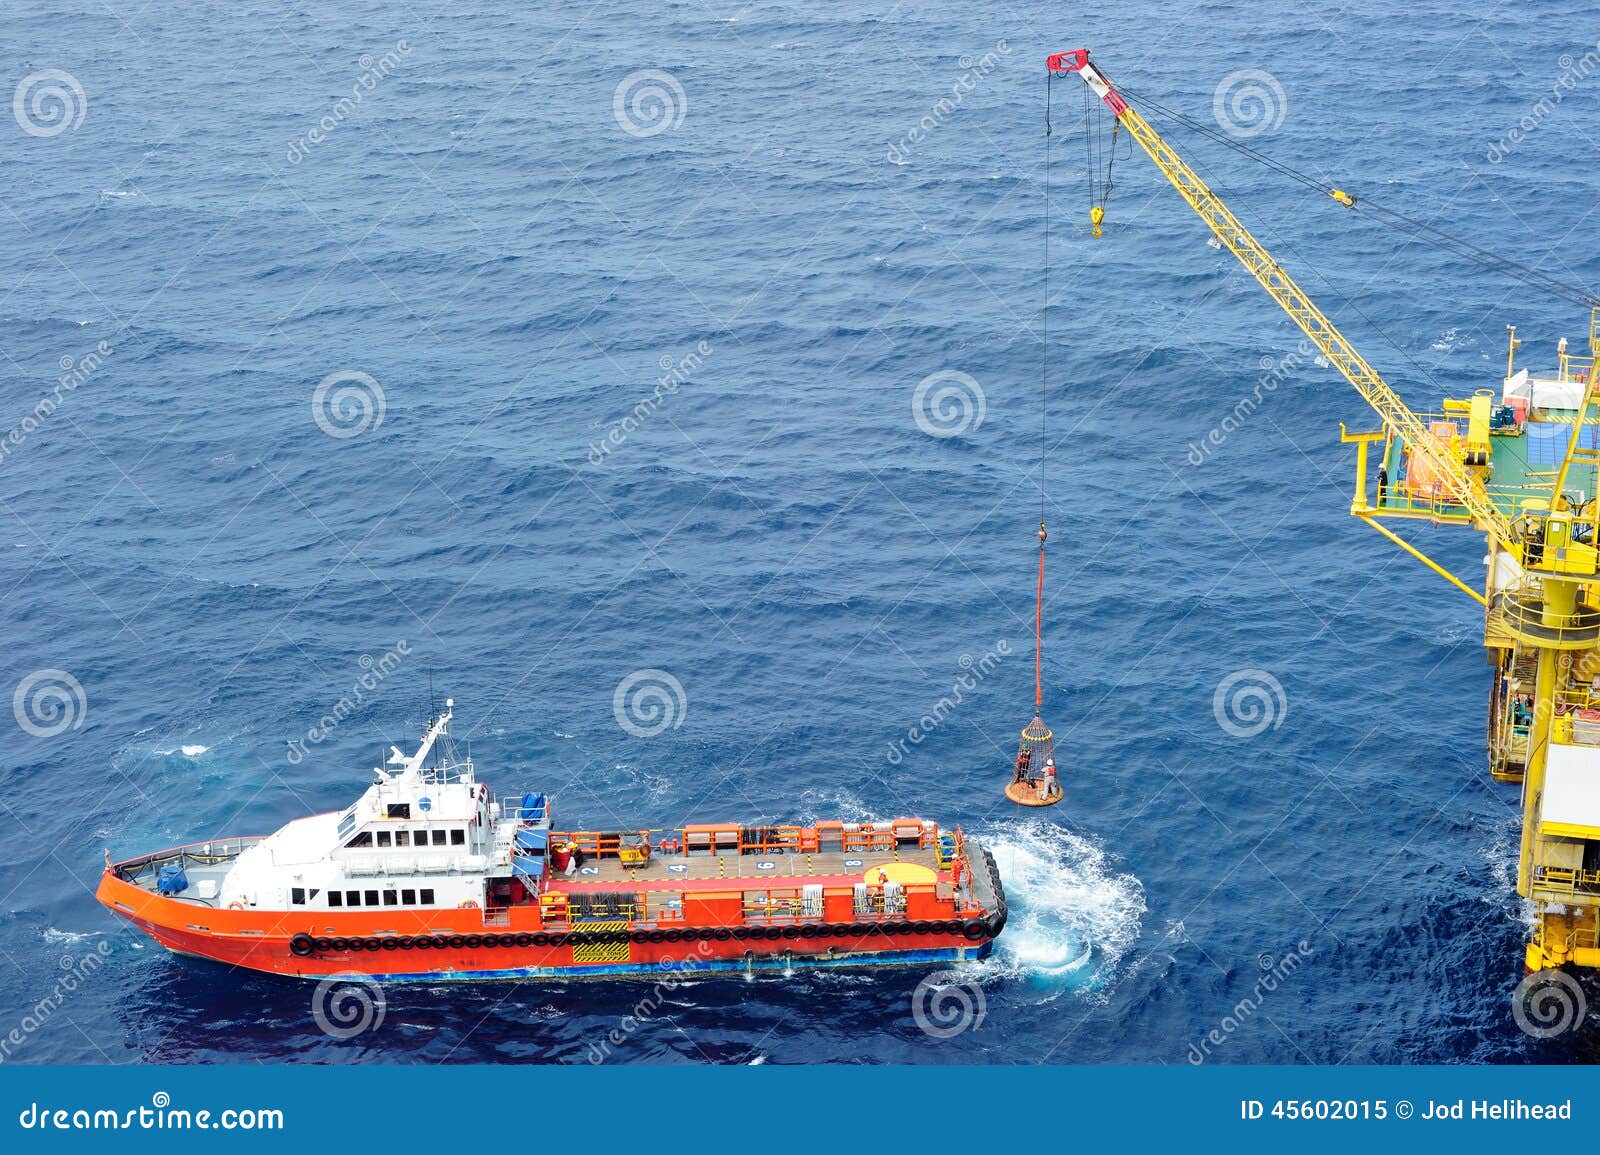 transferring offshore personnel to the oil platform